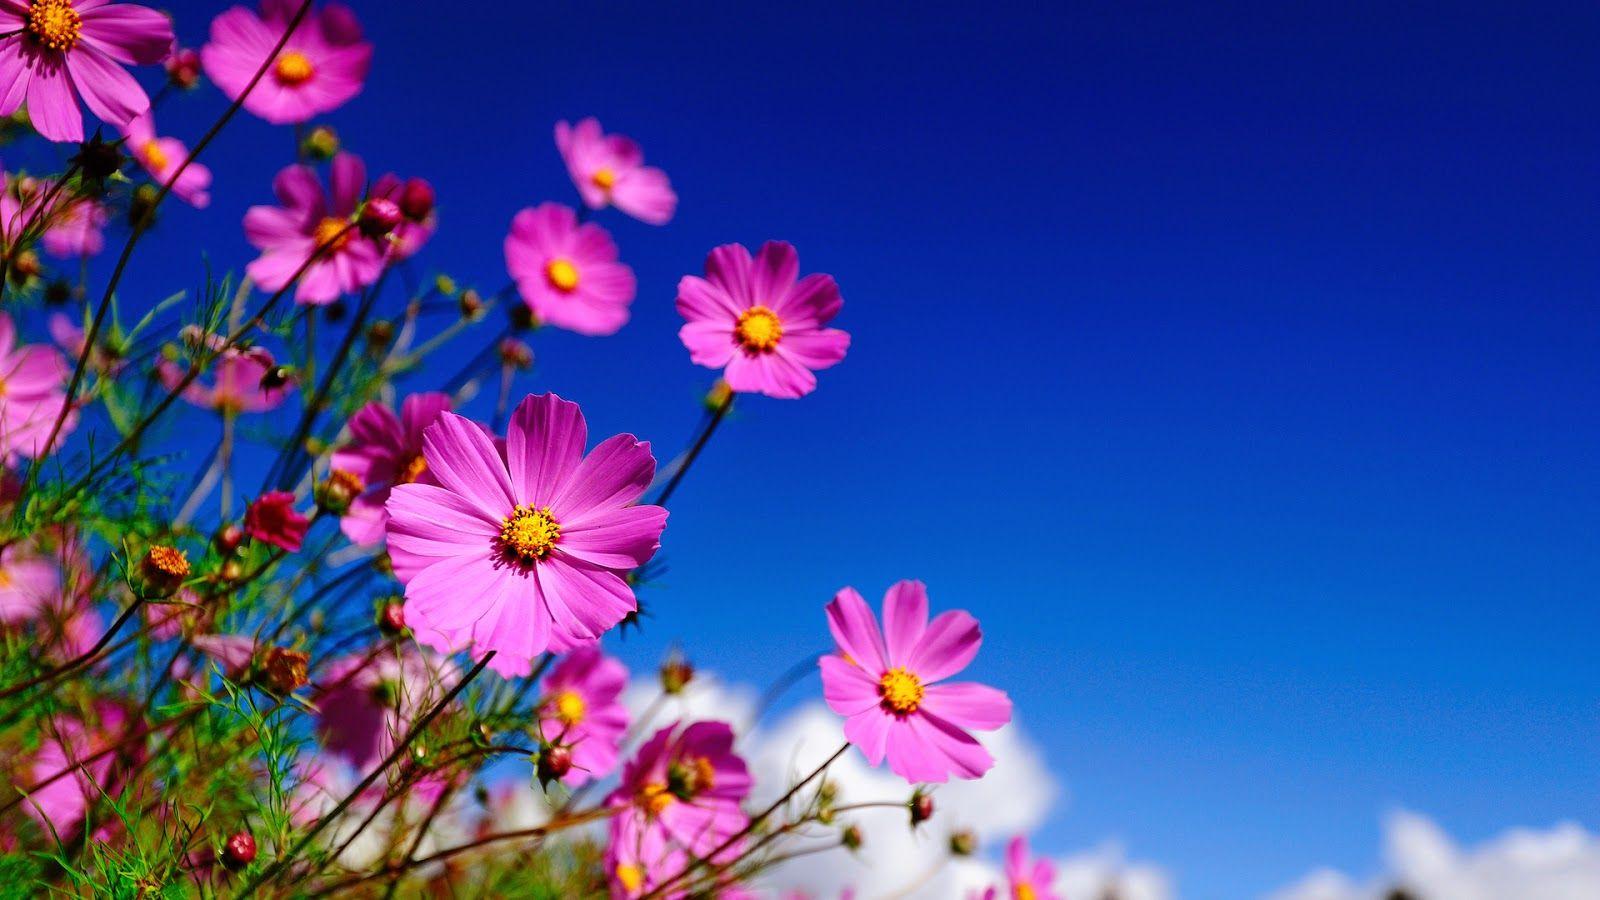 Download New Flowers Full Screen HD Photo High Quality Background